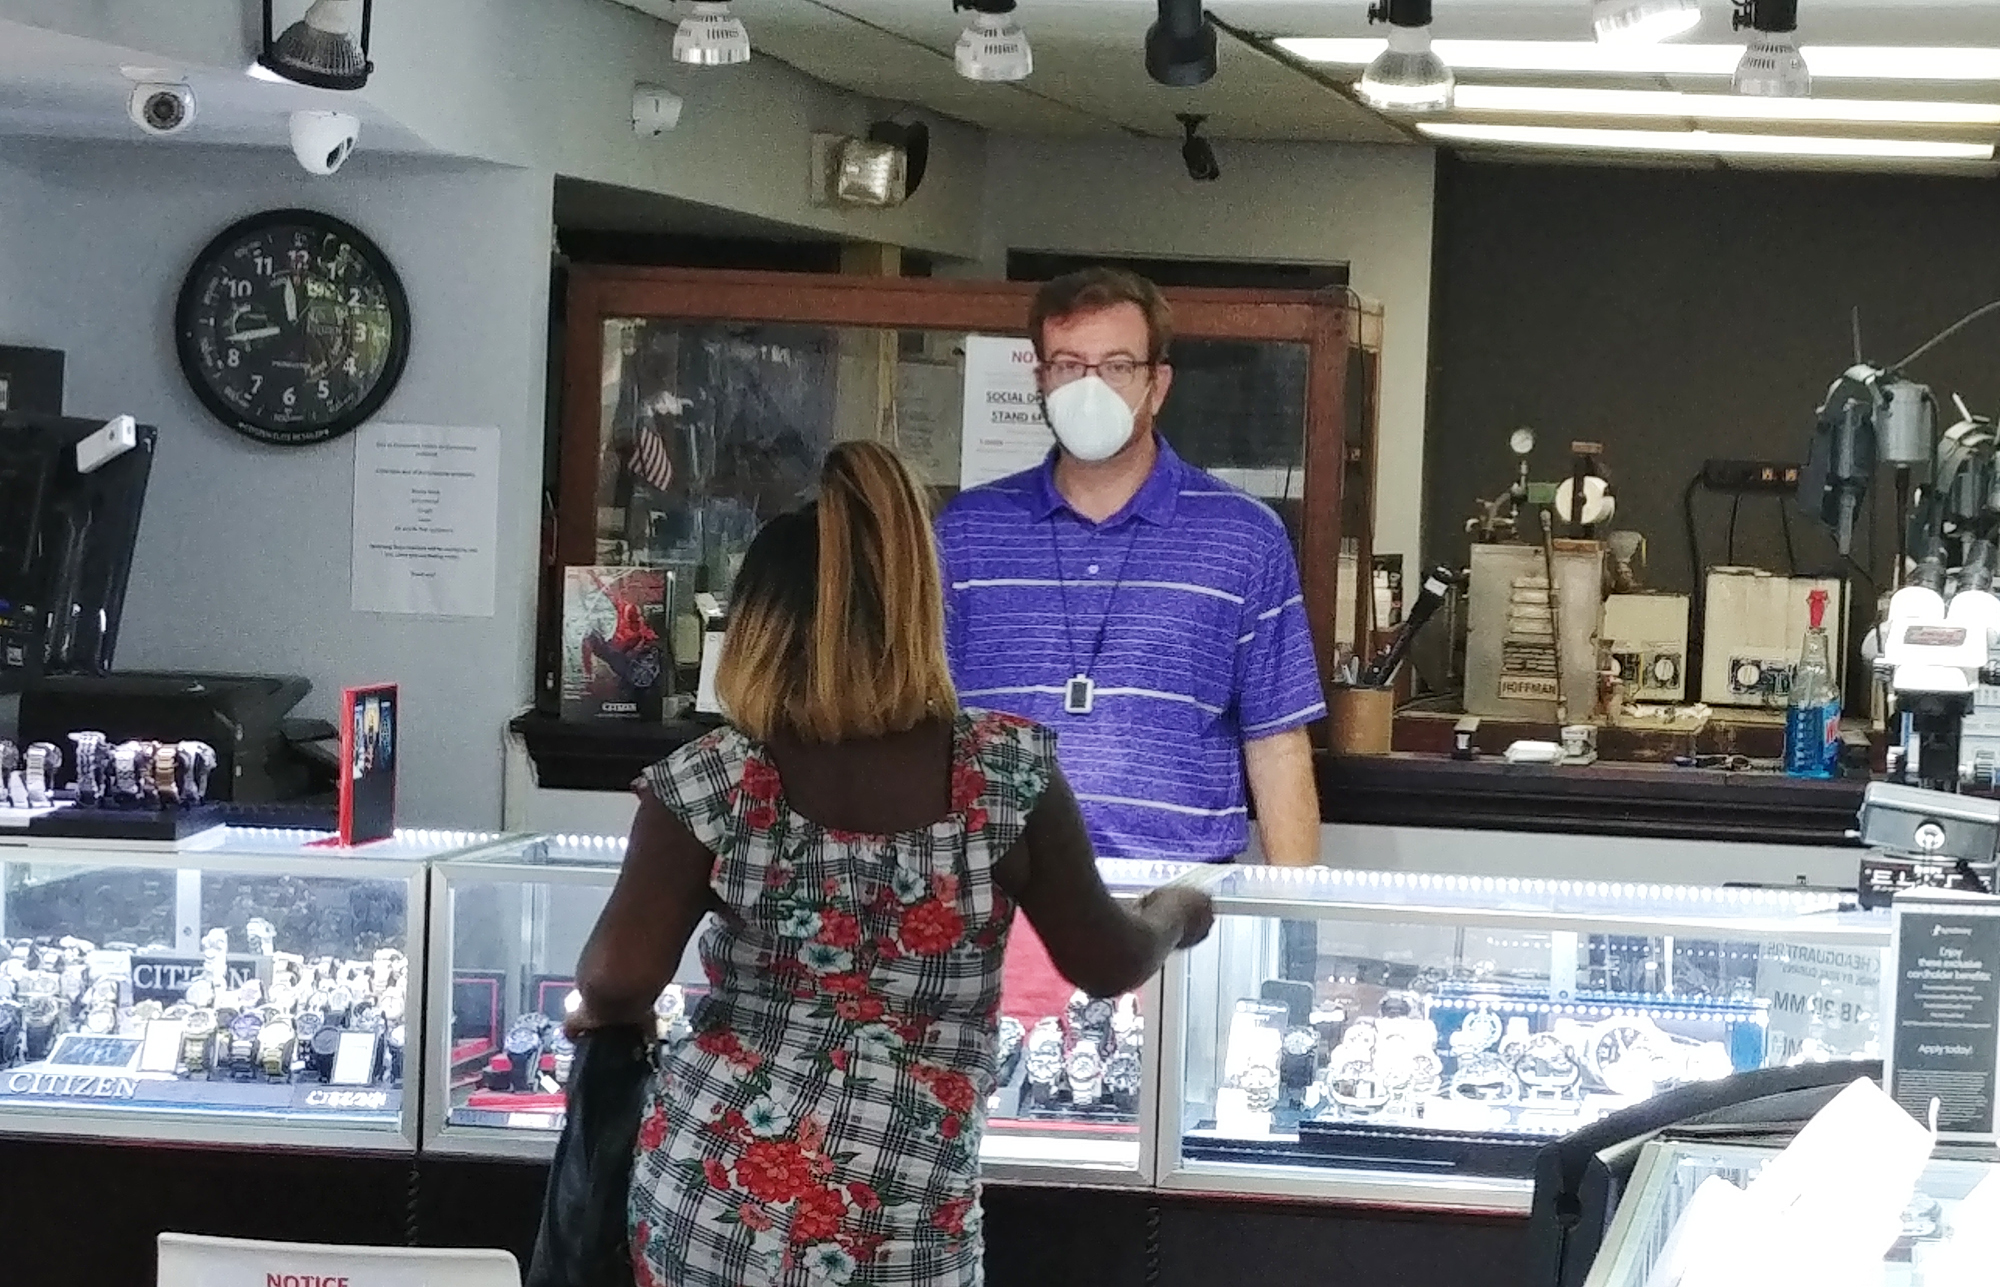 At Hemming Plaza Jewelers at 231 N. Hogan St., co-owner Juan Gonzalez serves a customer inside the store. The store didn’t close because of the pandemic, serving customers curbside.